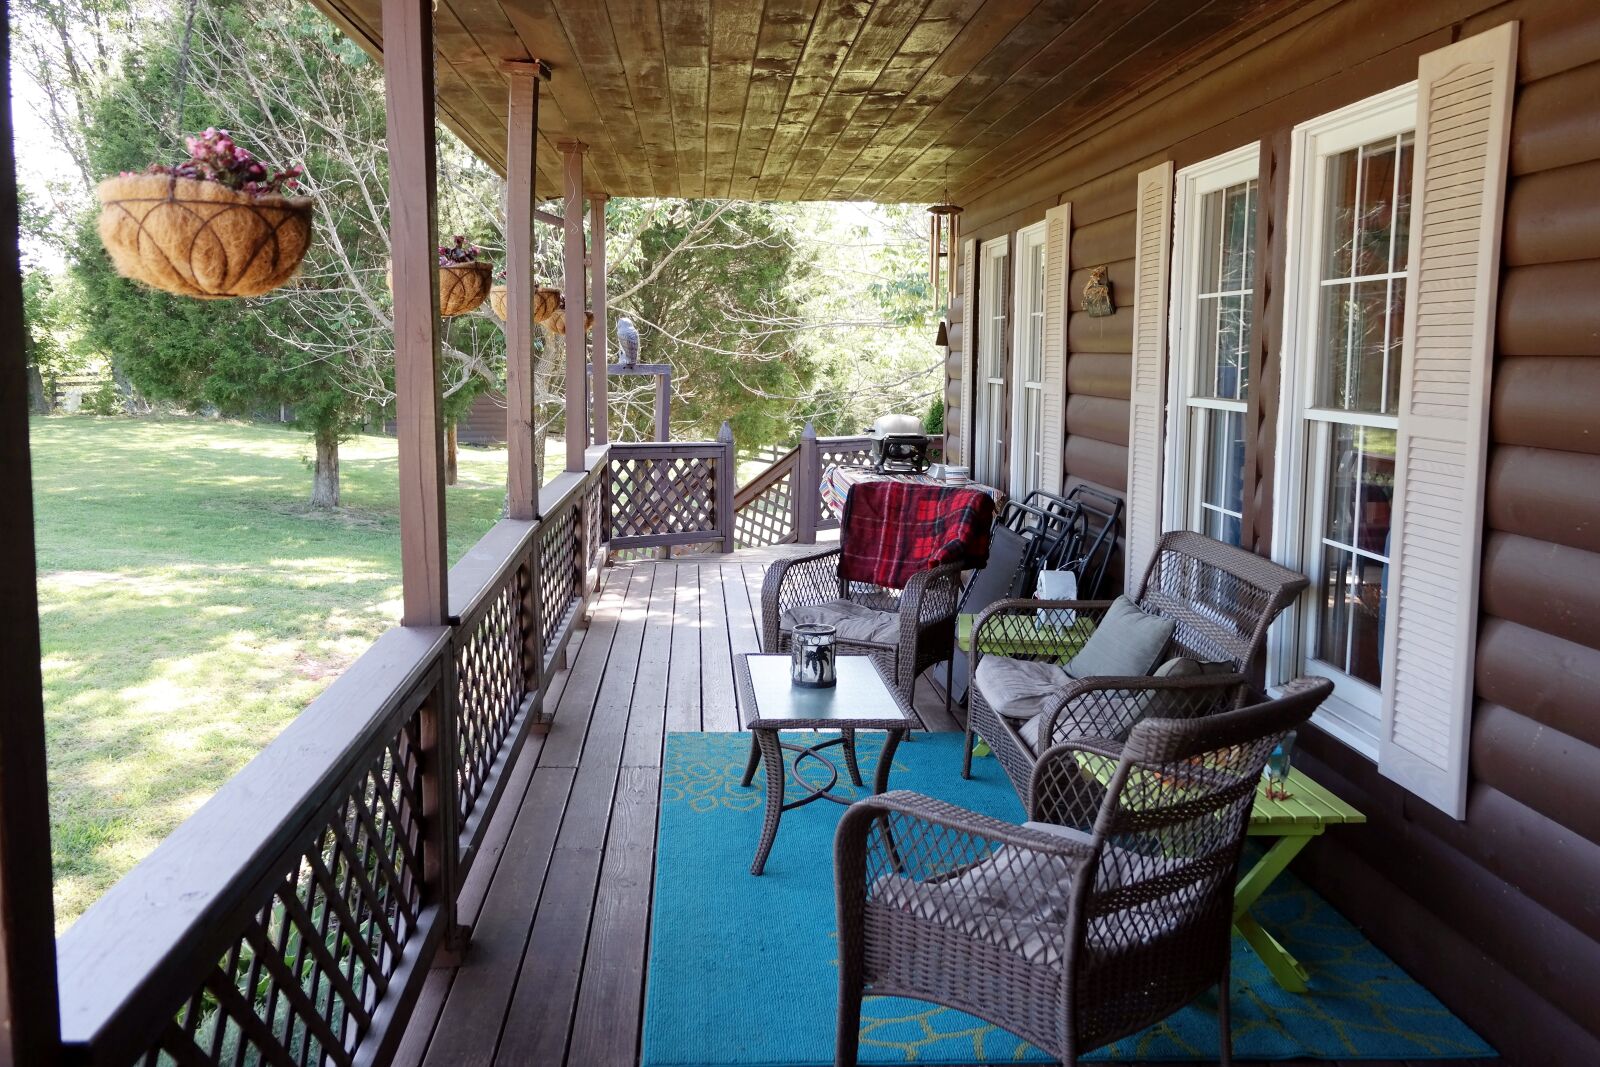 Samsung NX300 sample photo. Porch, country living, covered photography